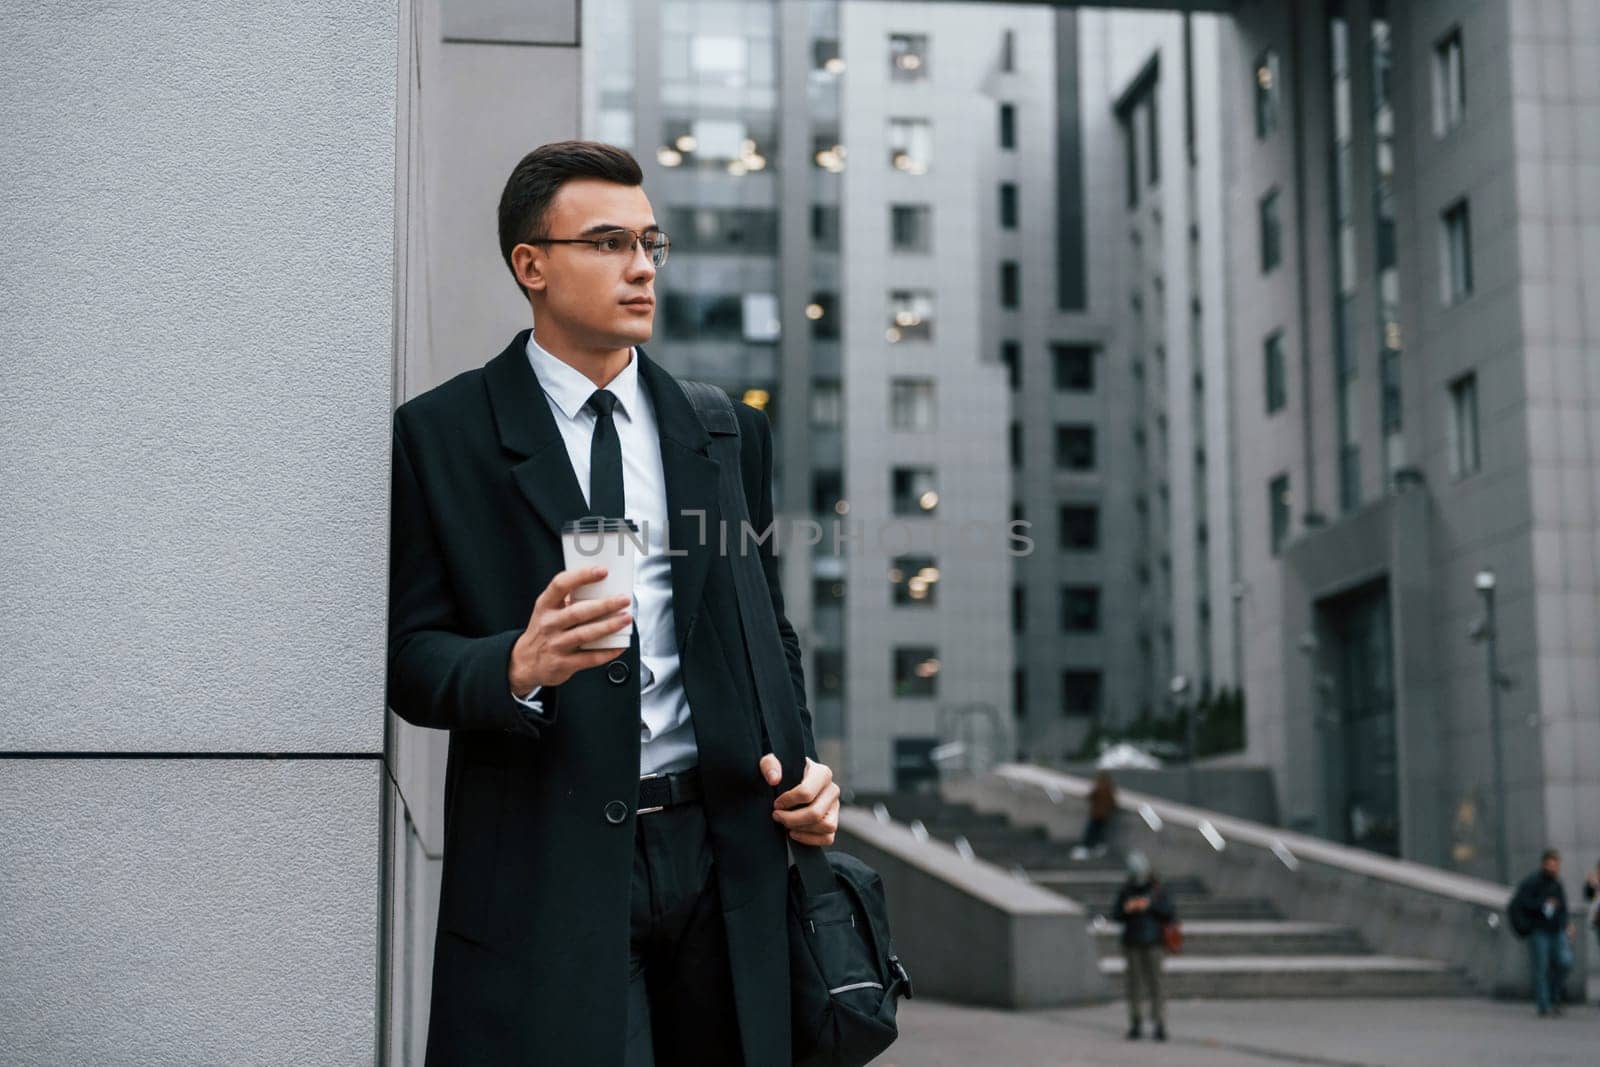 Standing near the building. Businessman in black suit and tie is outdoors in the city.